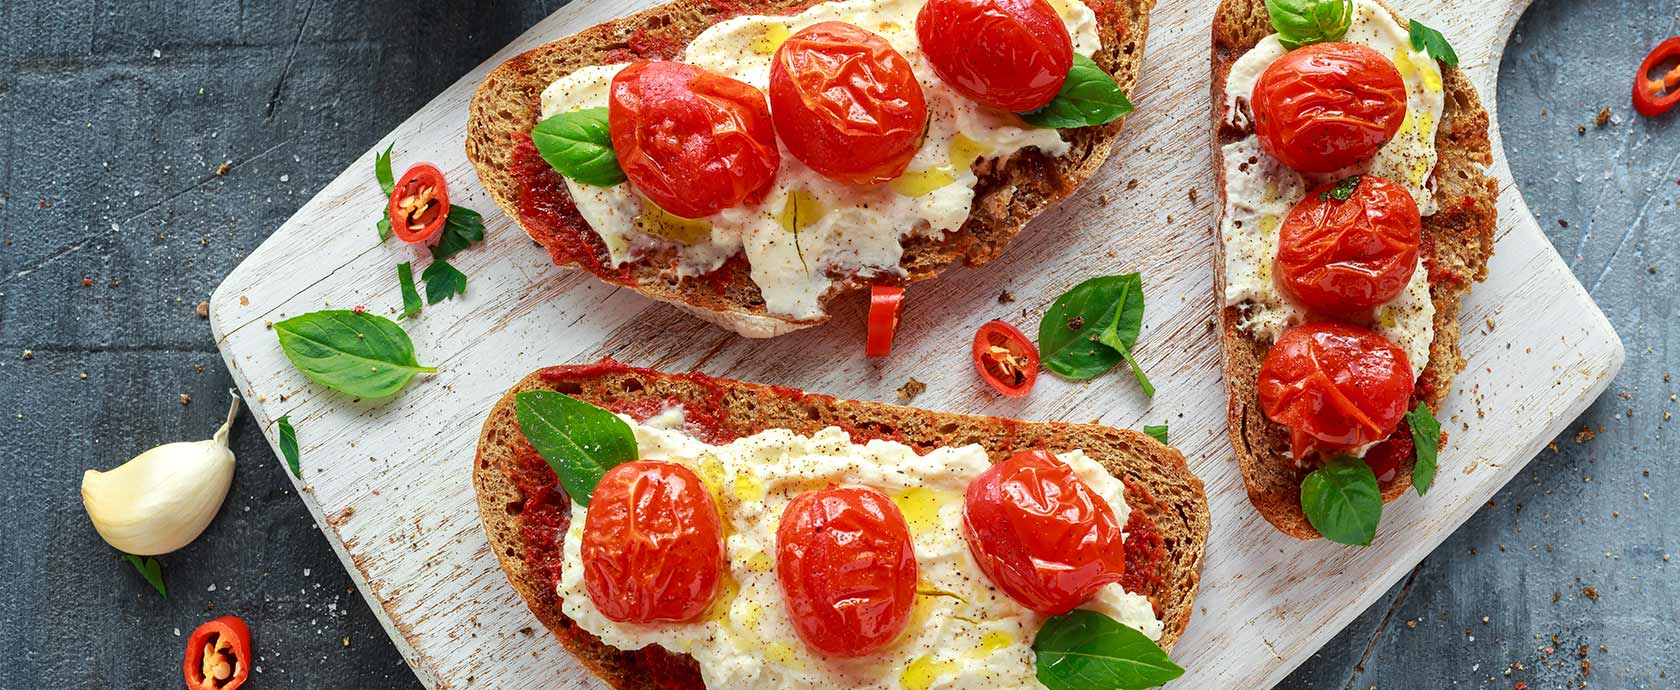 toasted bread with cheese, tomatoes and basil